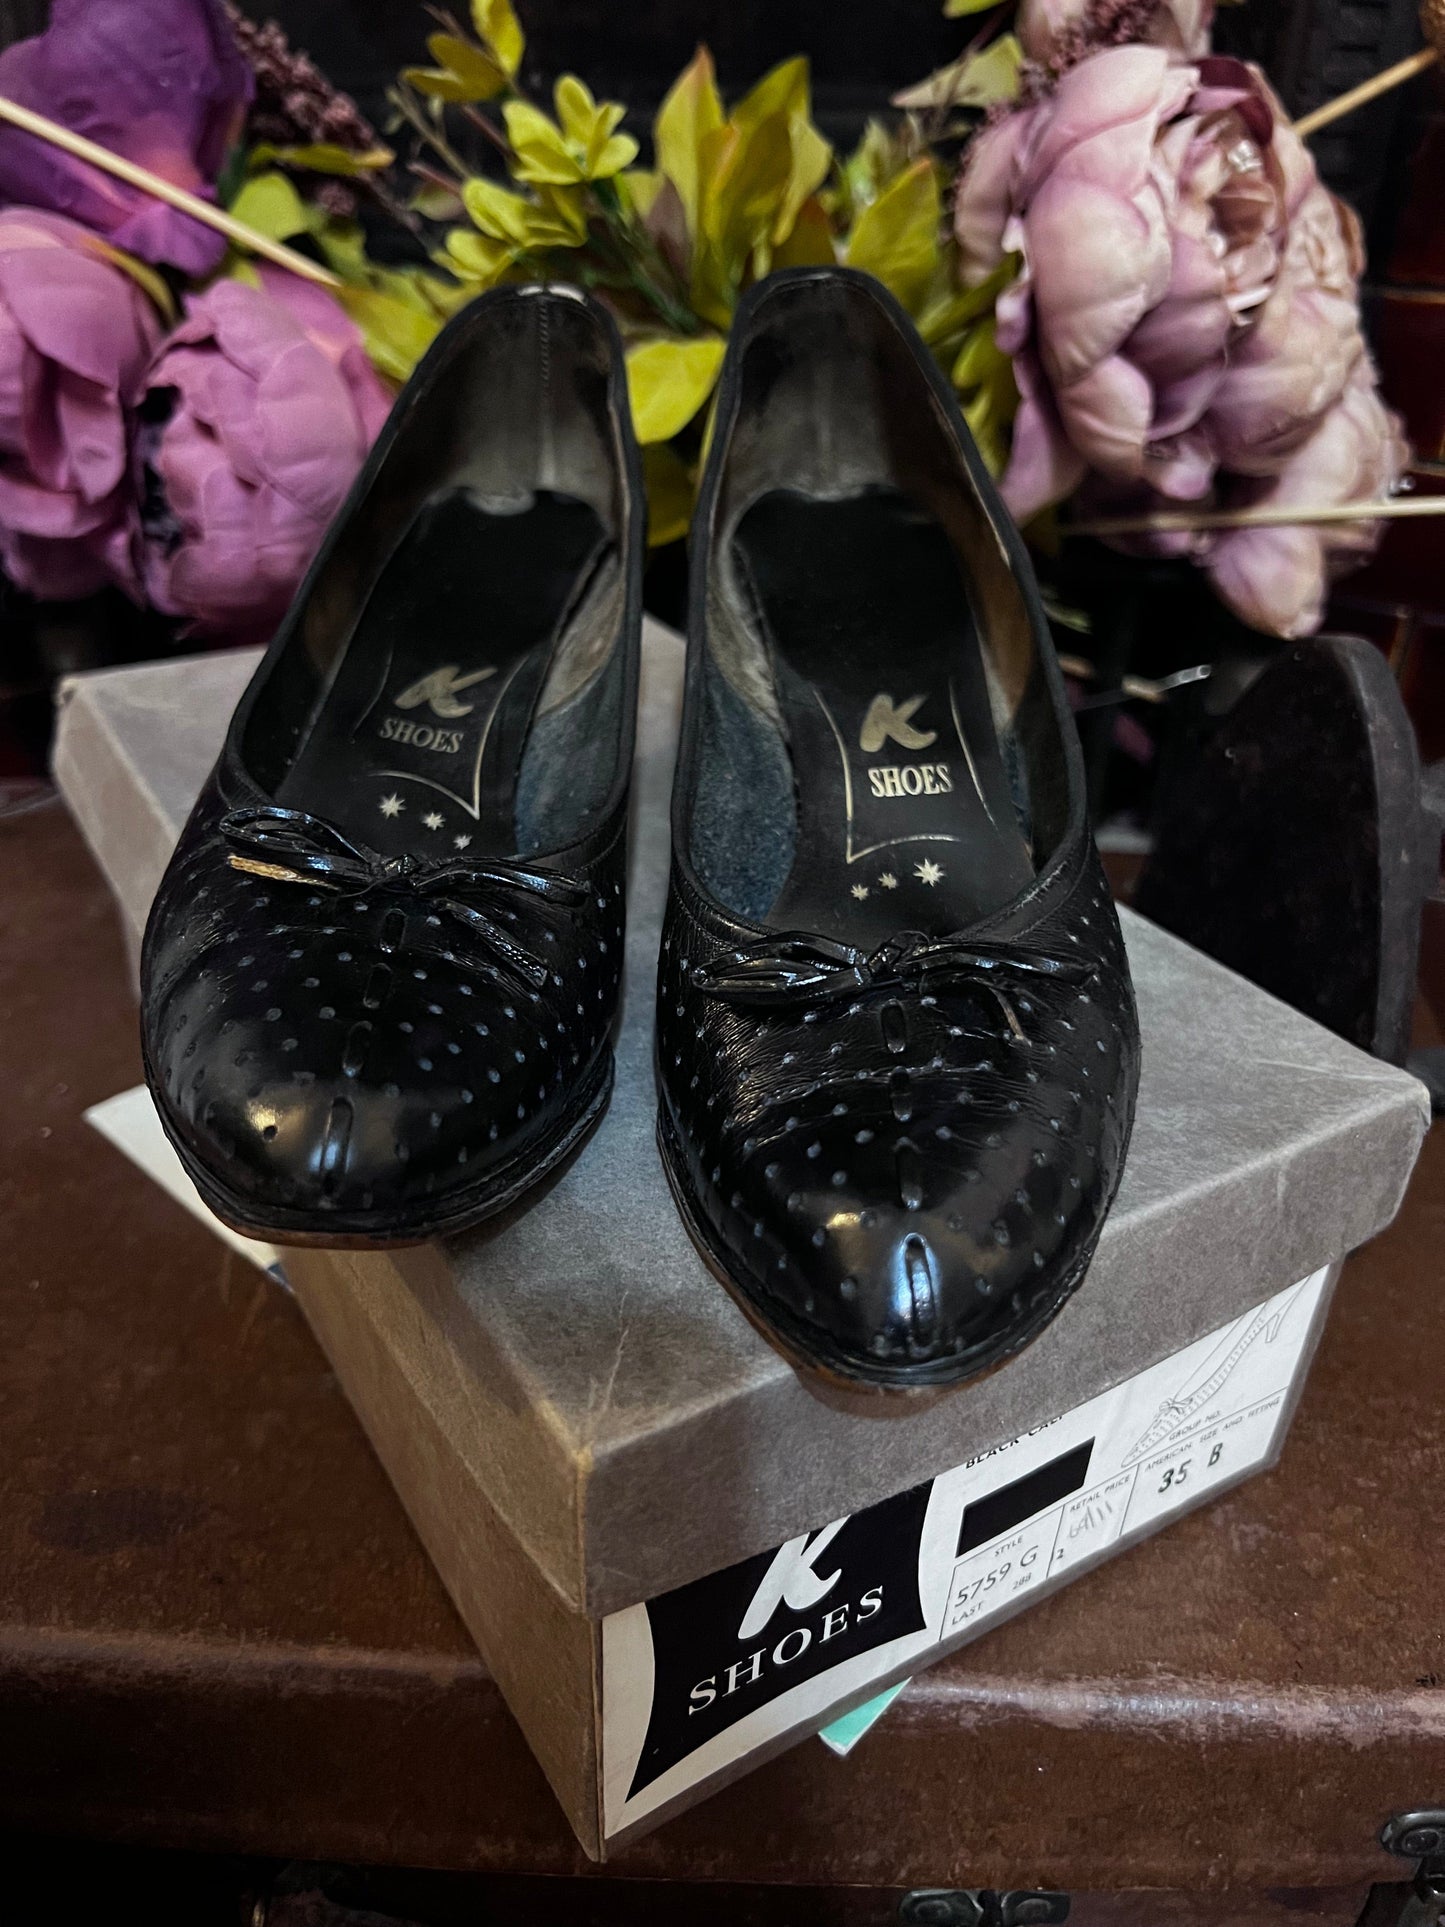 70s Black Shoes leather Pointed Shoes Black Kid leather, Vintage Vintage Shoes, 70s Shoes, vintage shoes & box UK2.5, re-soled reheel needed